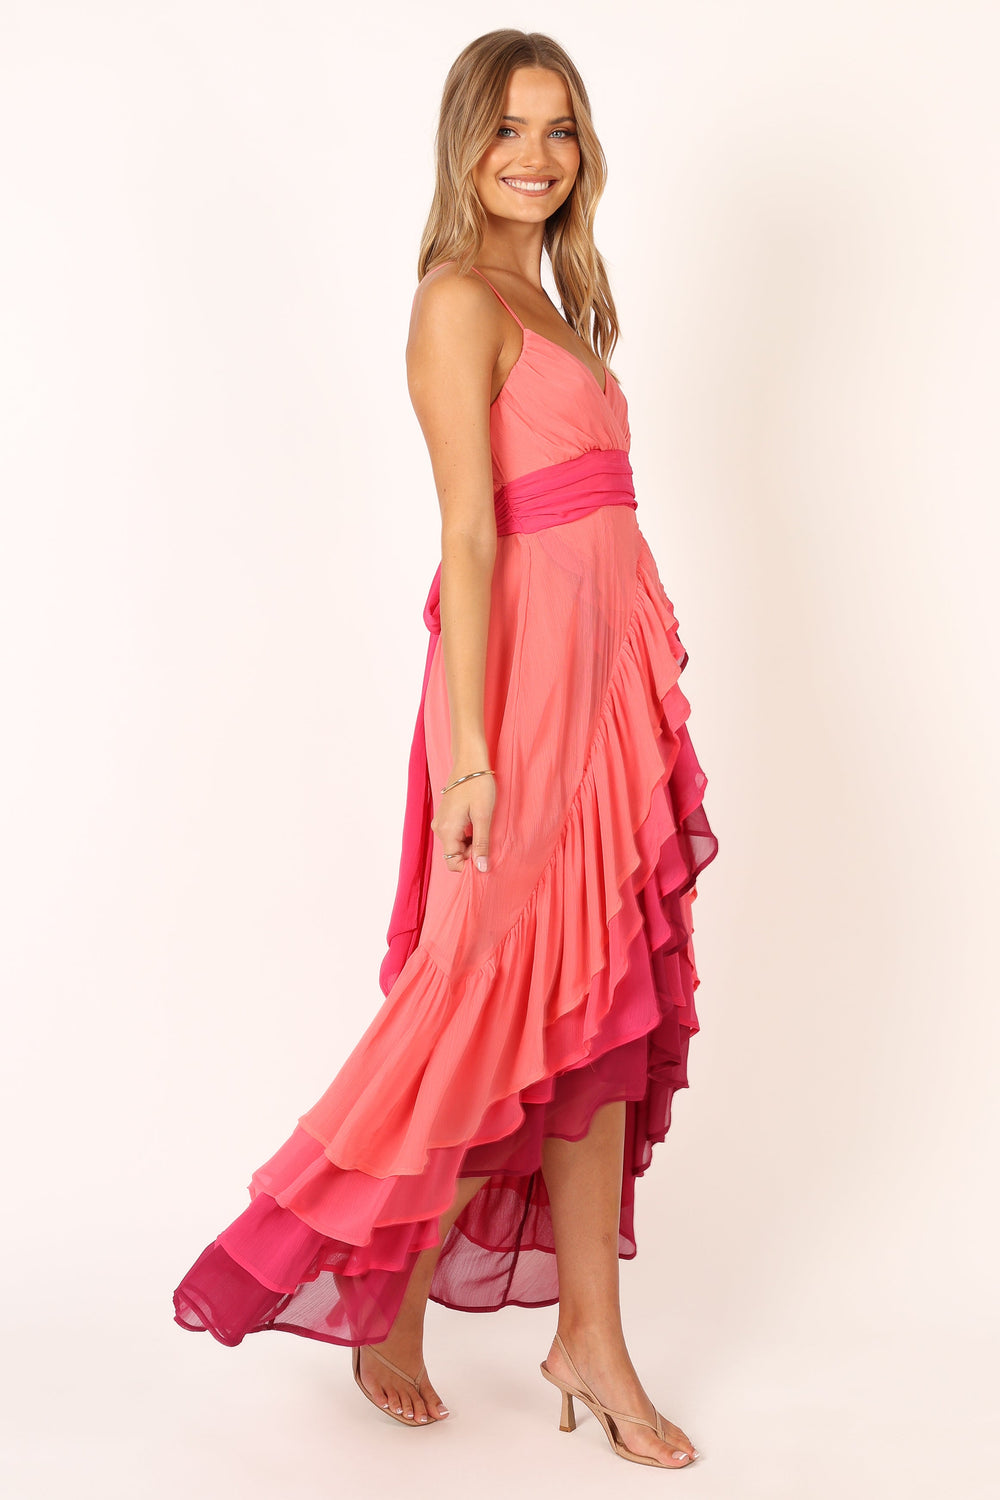 Buy Coral Pink Dresses for Women by Outryt Online